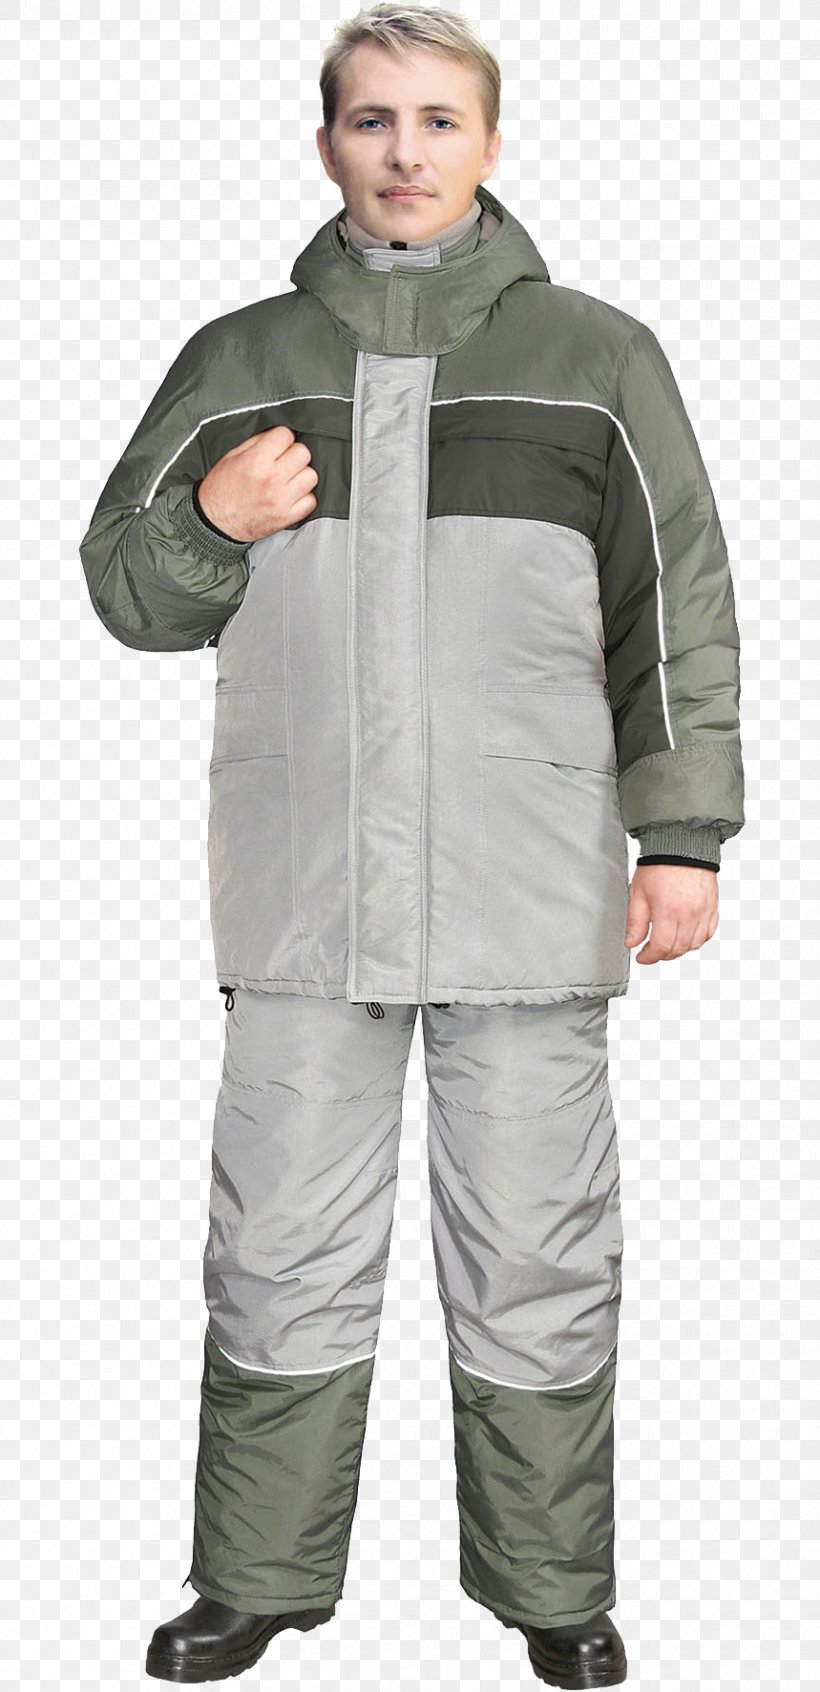 Jacket Outerwear Pants Sleeve Costume, PNG, 859x1773px, Jacket, Costume, Grey, Hood, Outerwear Download Free